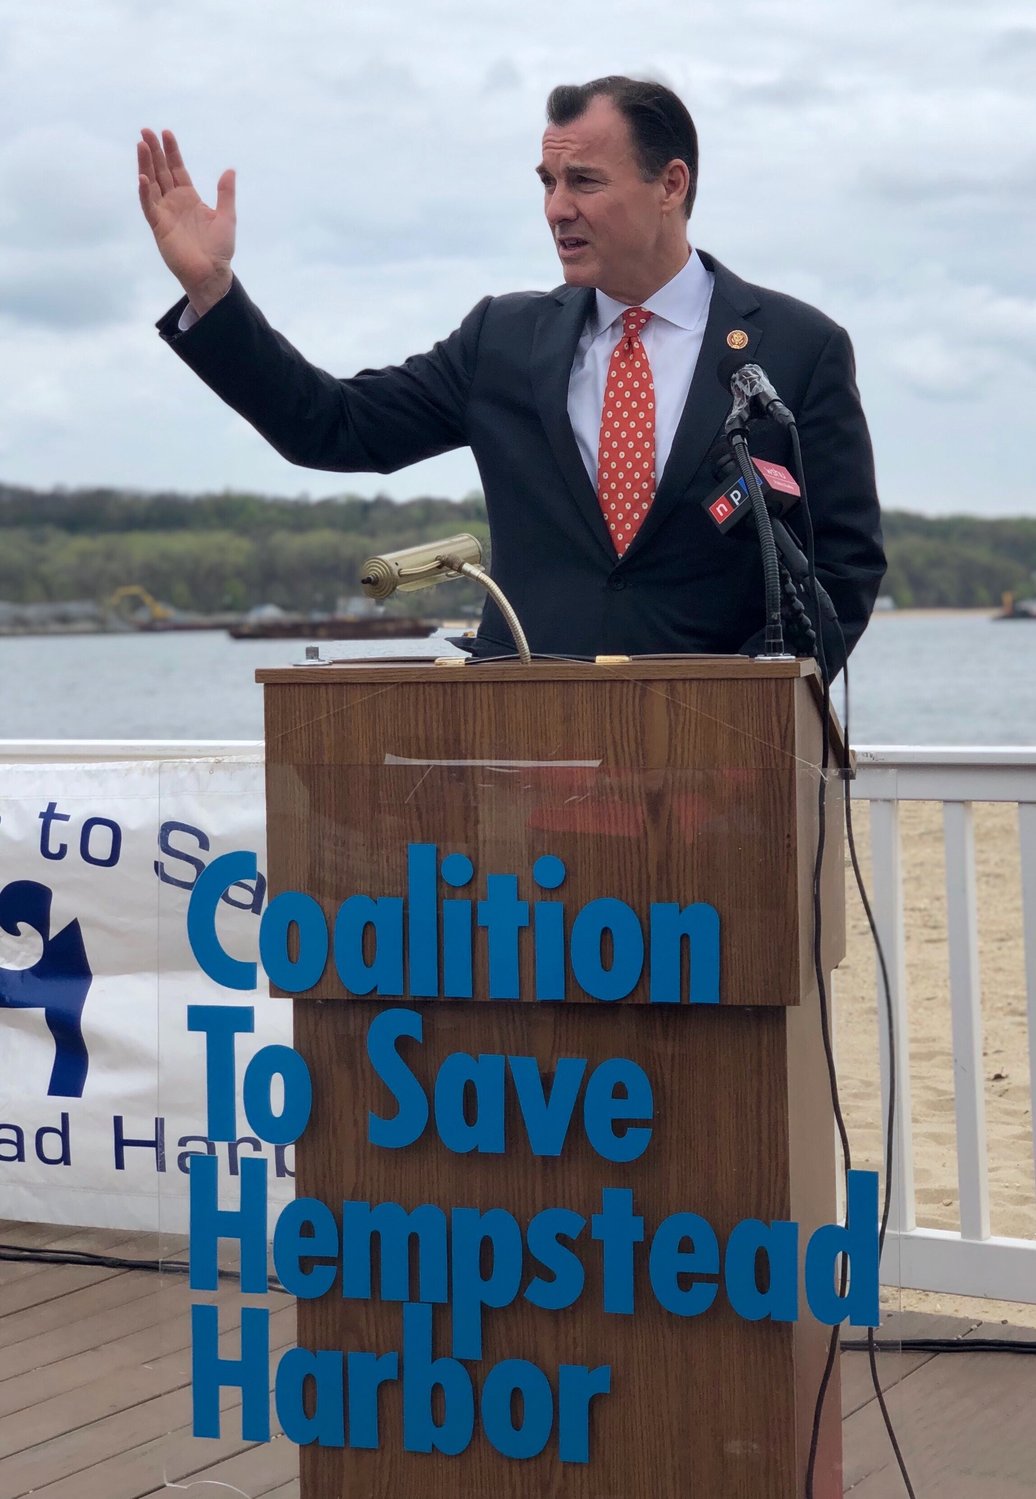 On Tuesday, U.S. Rep Tom Suozzi announced new federal funding to help protect the Long Island Sound and Hempstead Harbor.